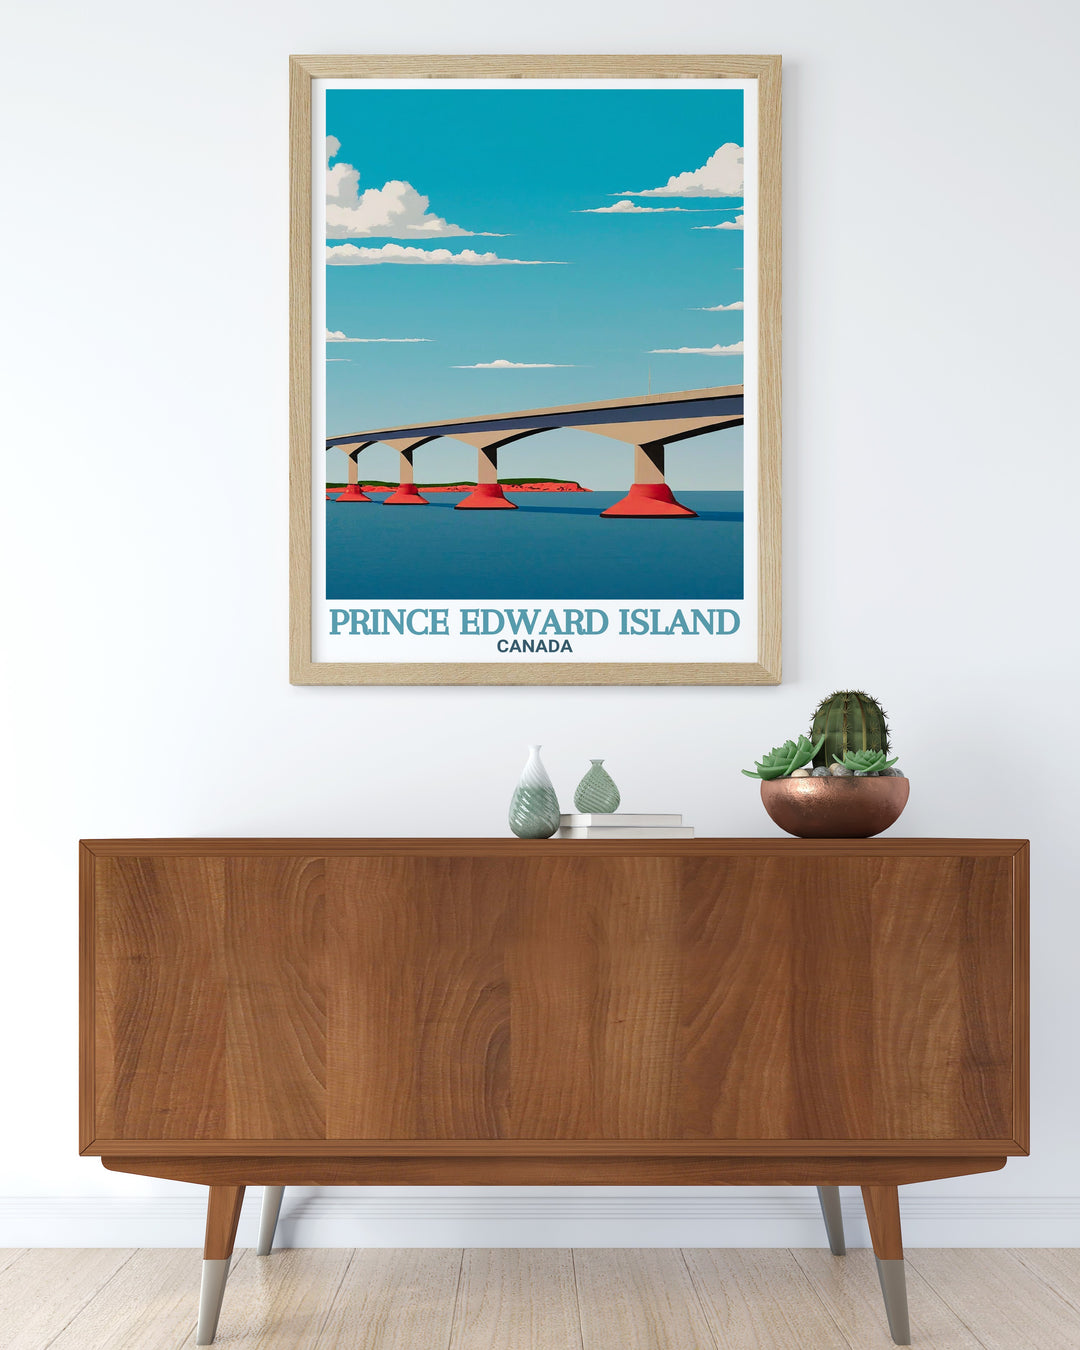 Elegant home decor prints of Confederation Bridge featuring the iconic structure and its picturesque landscapes offering a serene and stylish addition to any living space making them ideal as birthday gifts or housewarming gifts.